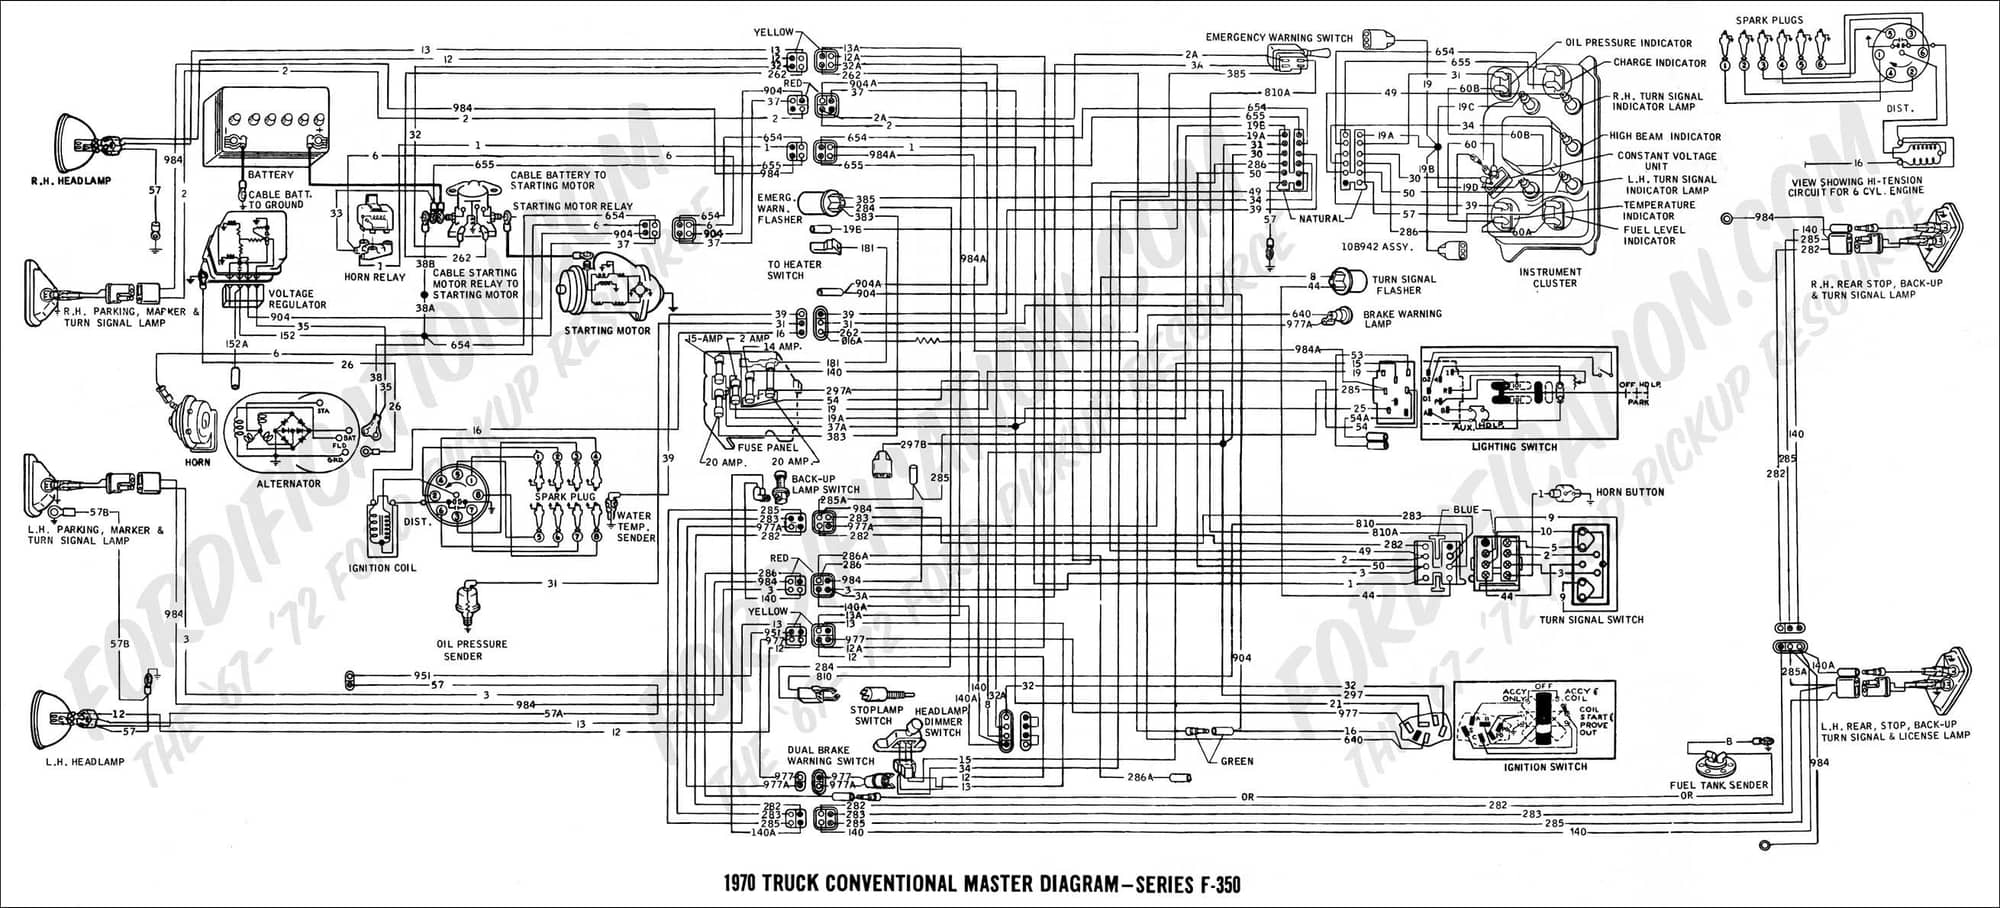 1971 F250 gauge picture & Information - Ford Truck Enthusiasts Forums  Wiring Diagram For 1971 Ford F100    Ford Truck Enthusiasts